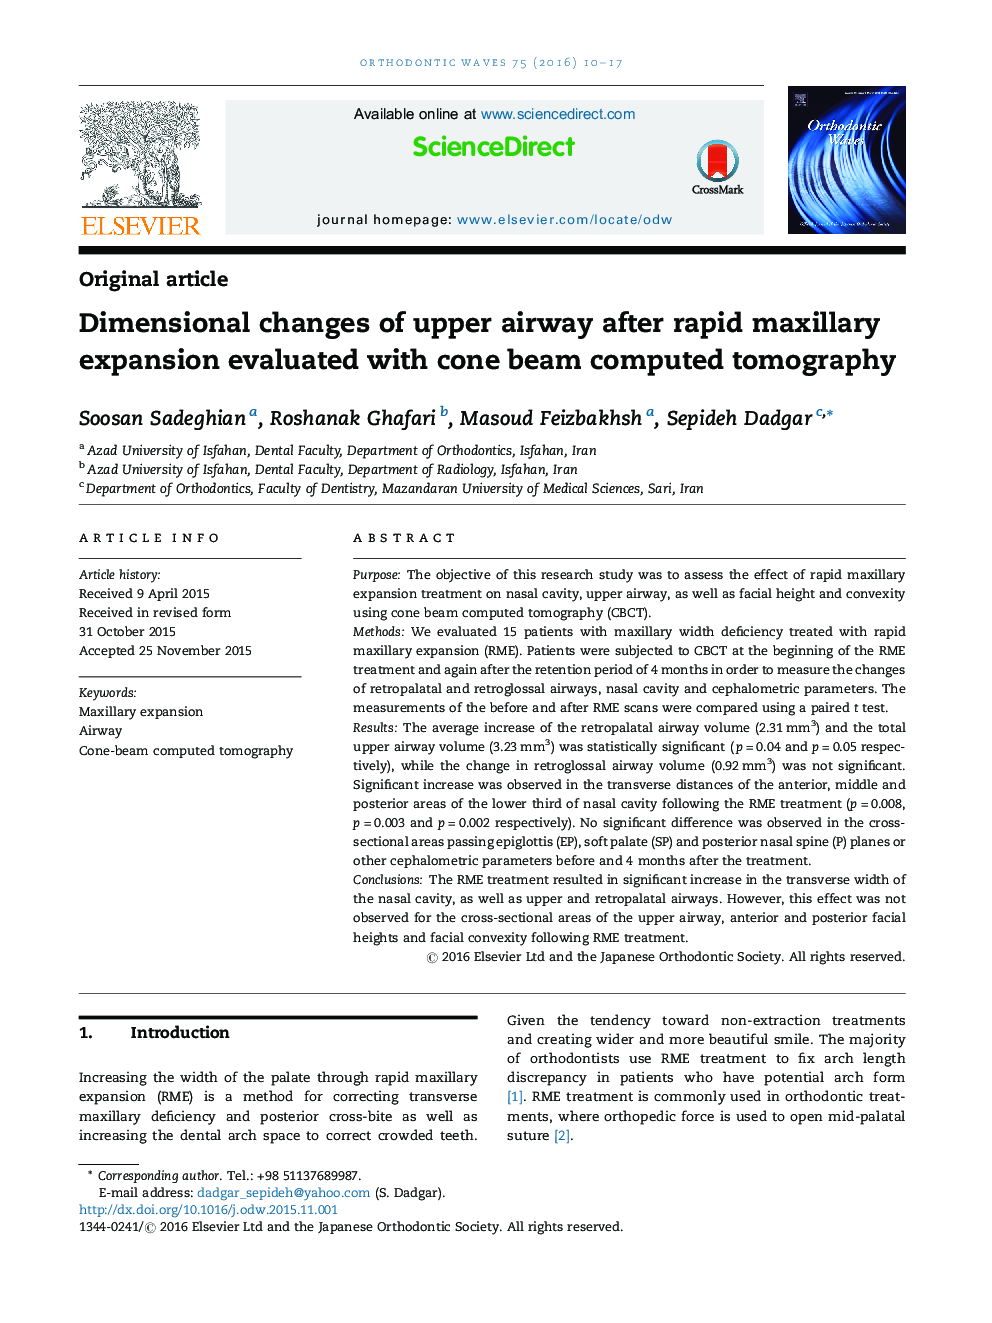 Dimensional changes of upper airway after rapid maxillary expansion evaluated with cone beam computed tomography